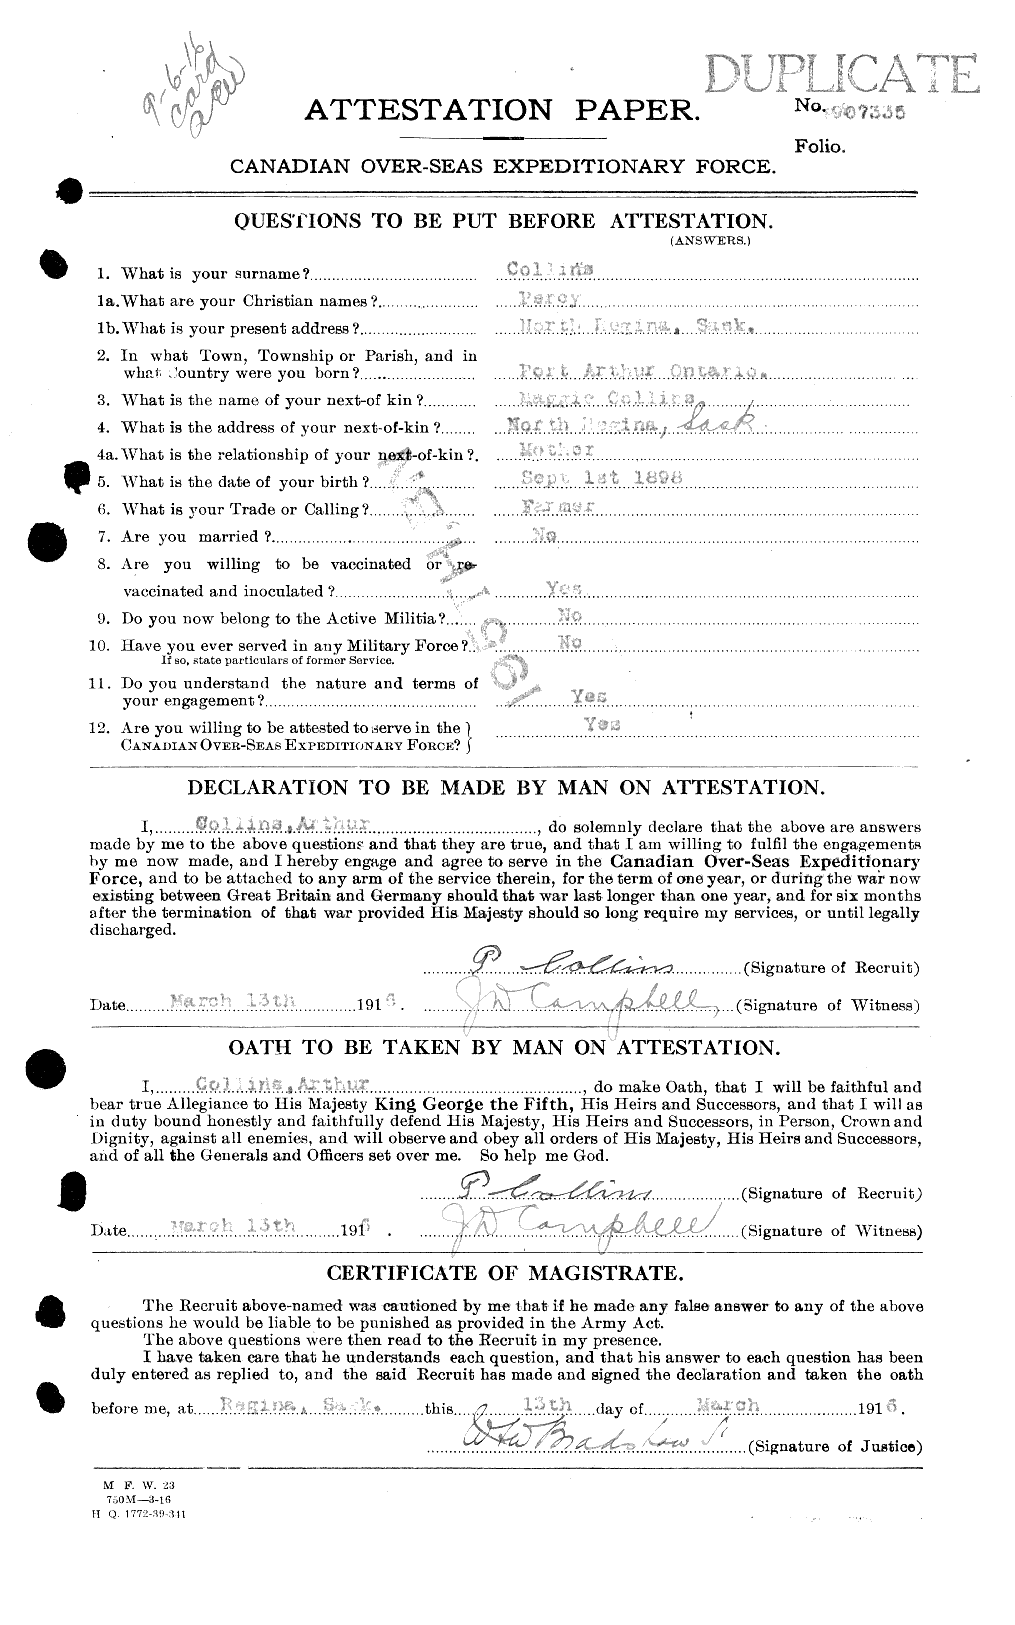 Personnel Records of the First World War - CEF 034489a